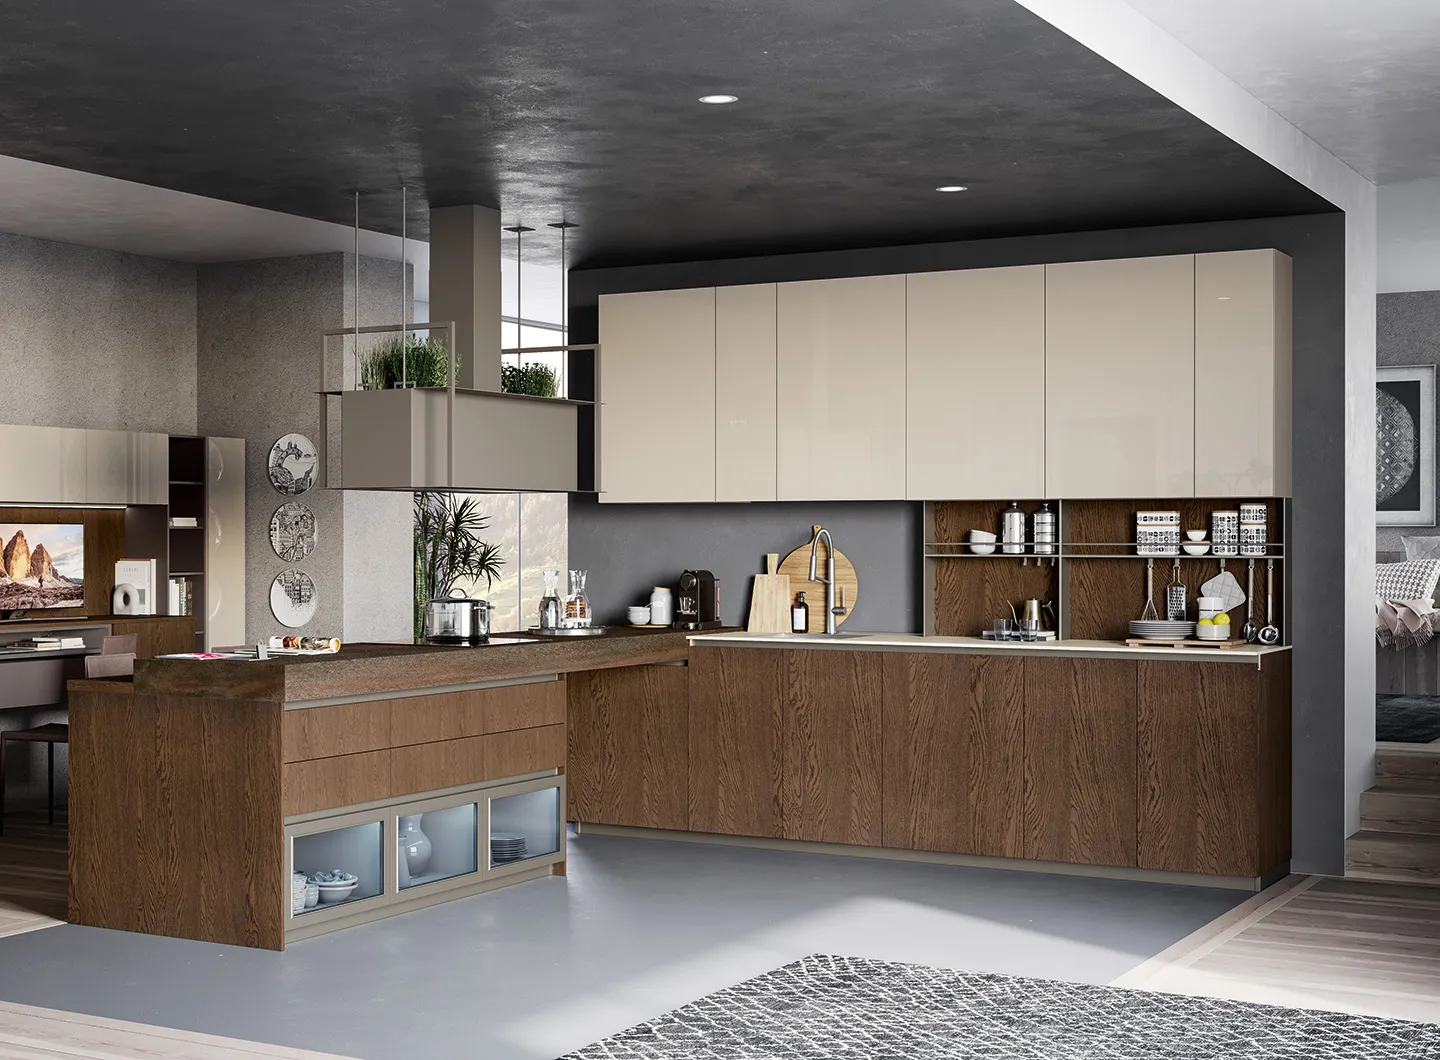 Tablet Wood by Creo Kitchens